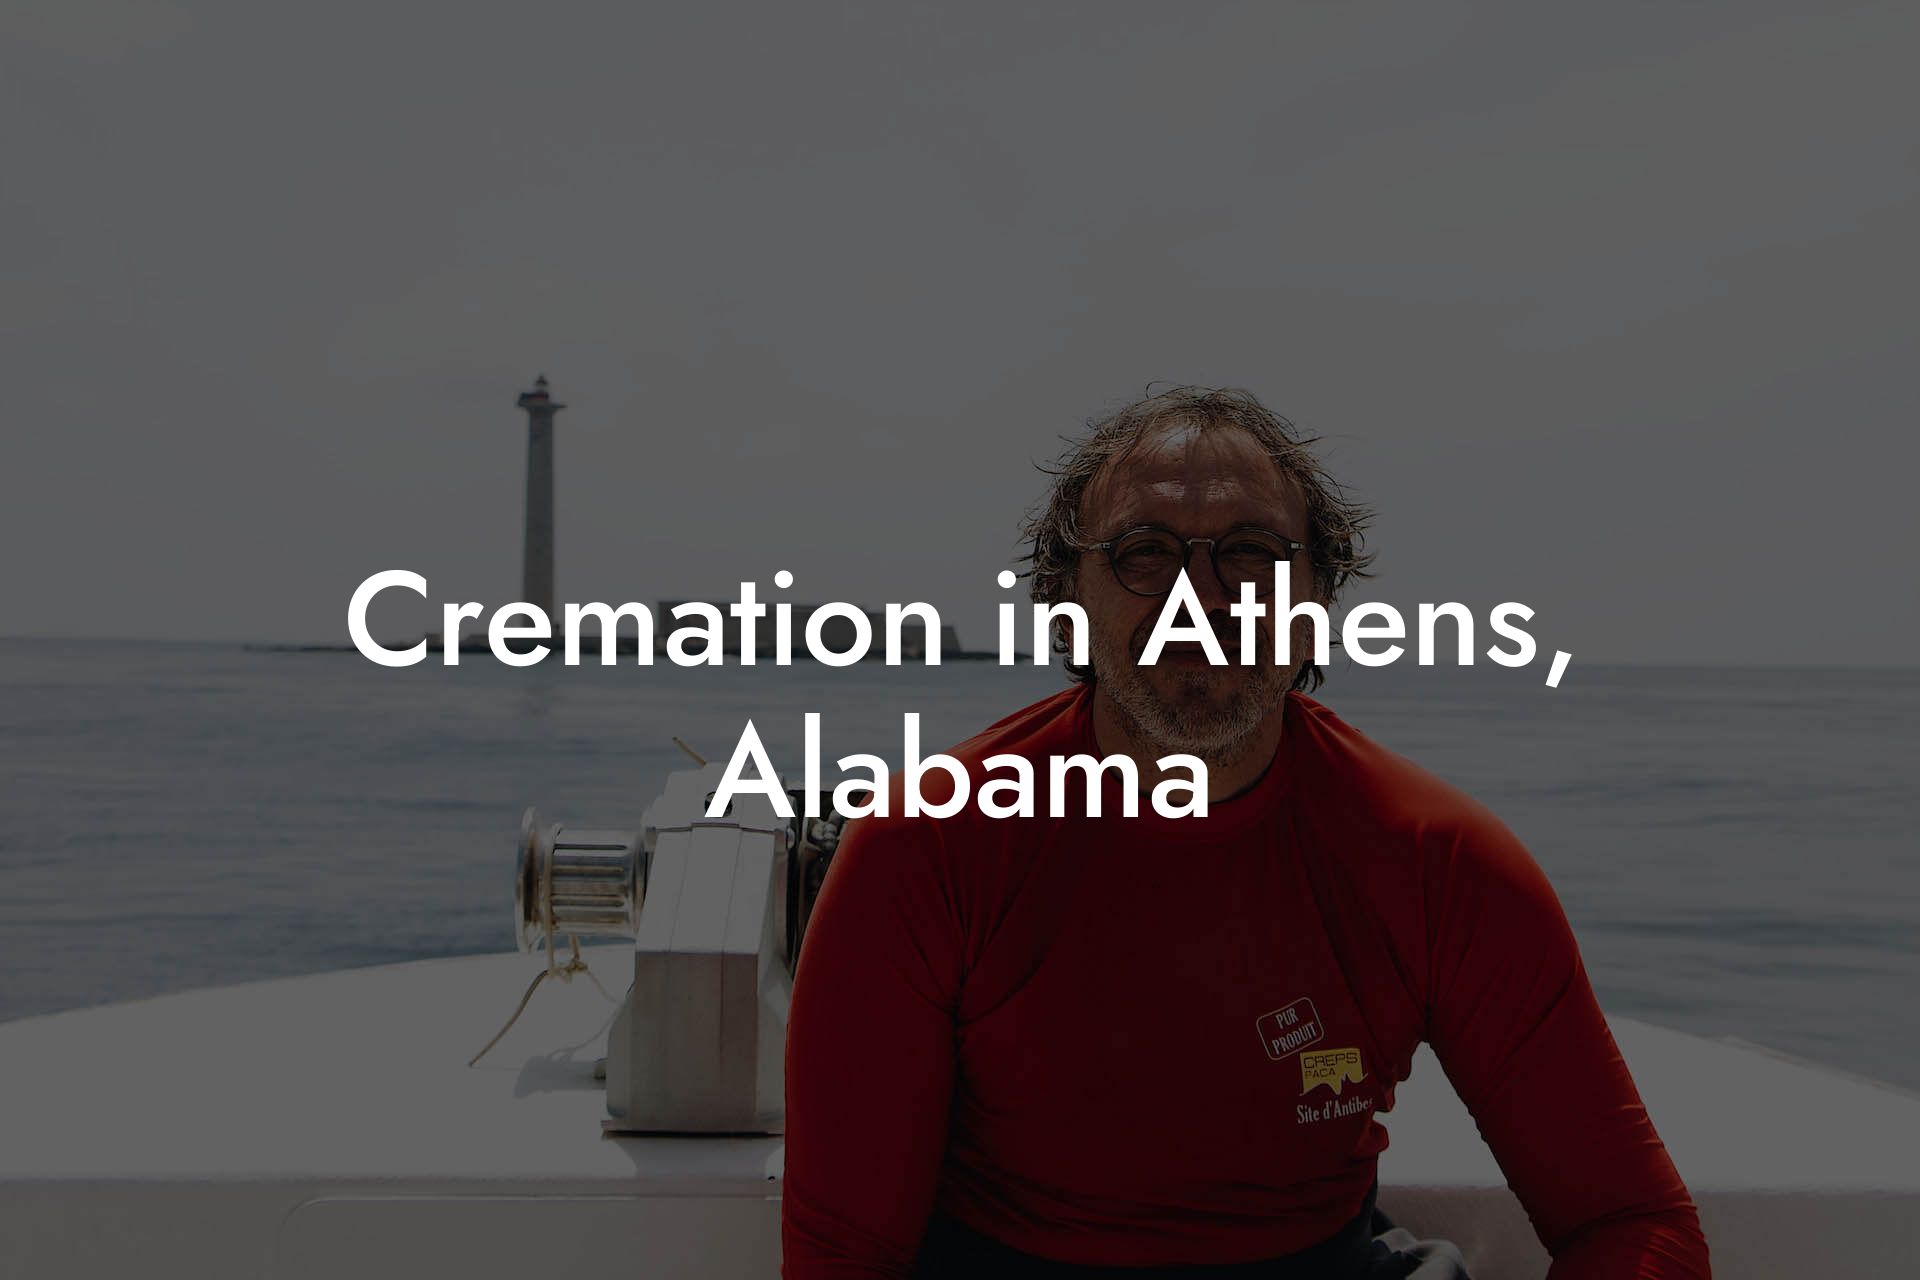 Cremation in Athens, Alabama